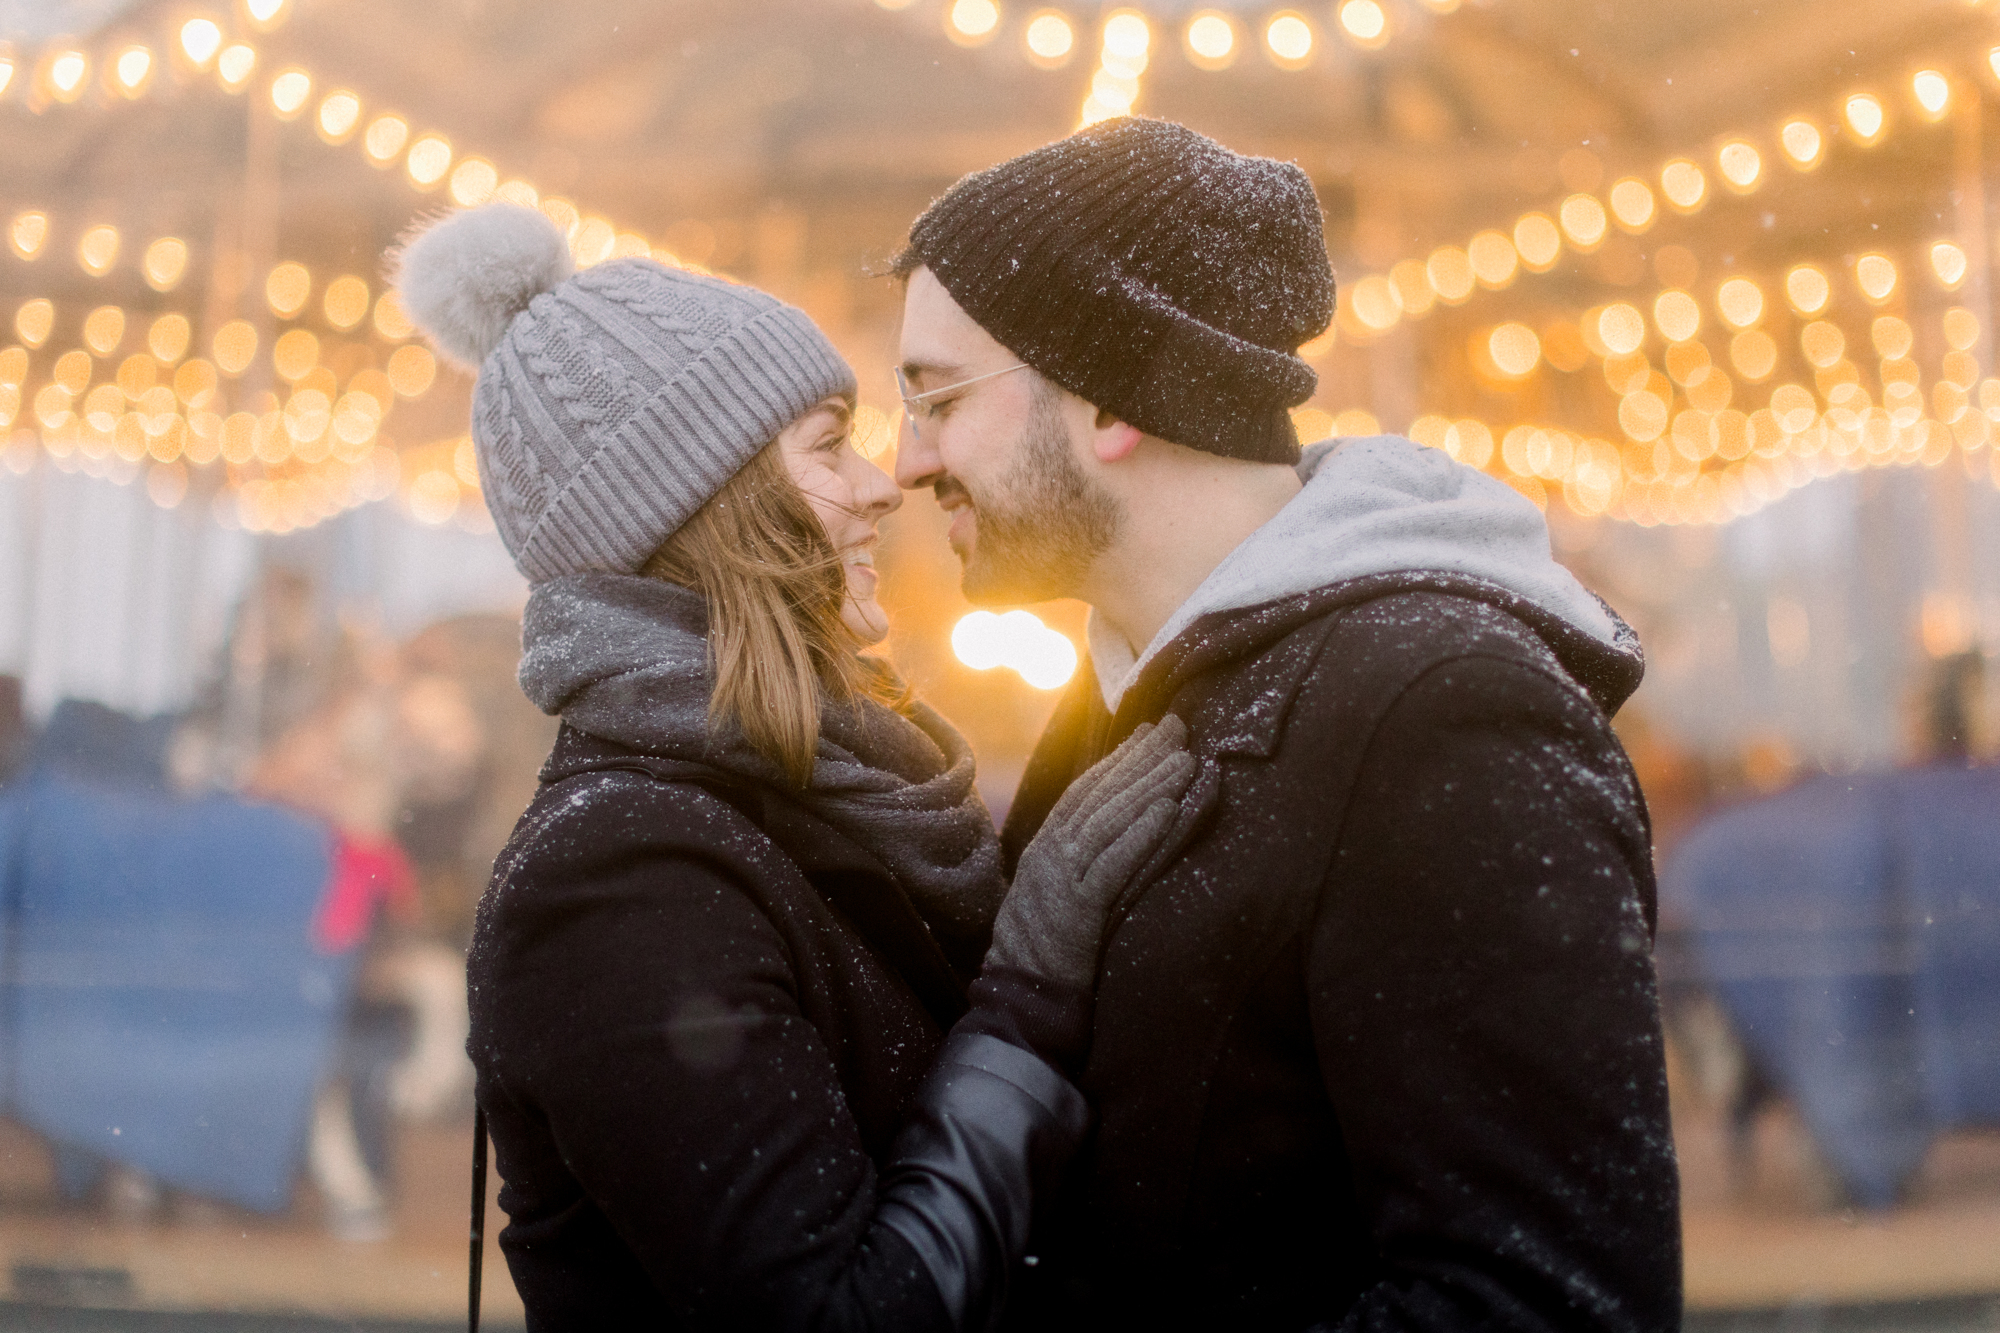 Snowy engagement photos at Jane's Carousel